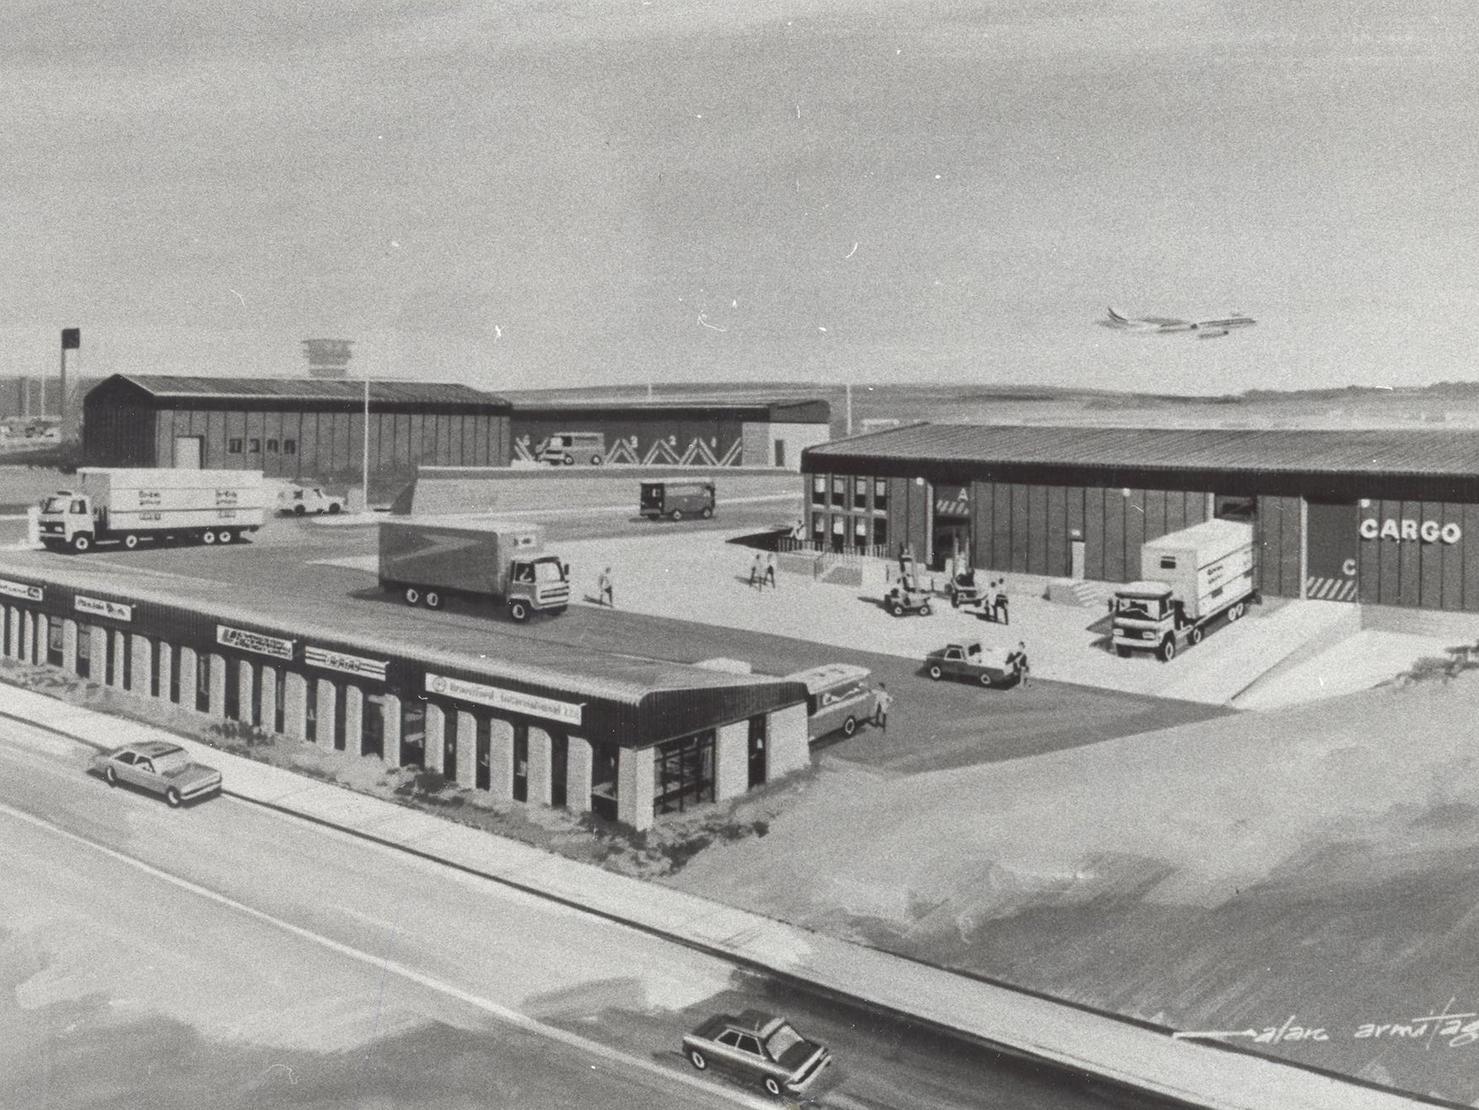 An artist's drawing of the new cargo terminal - a far cry from the old black hangar which had served the purpose for so many years.